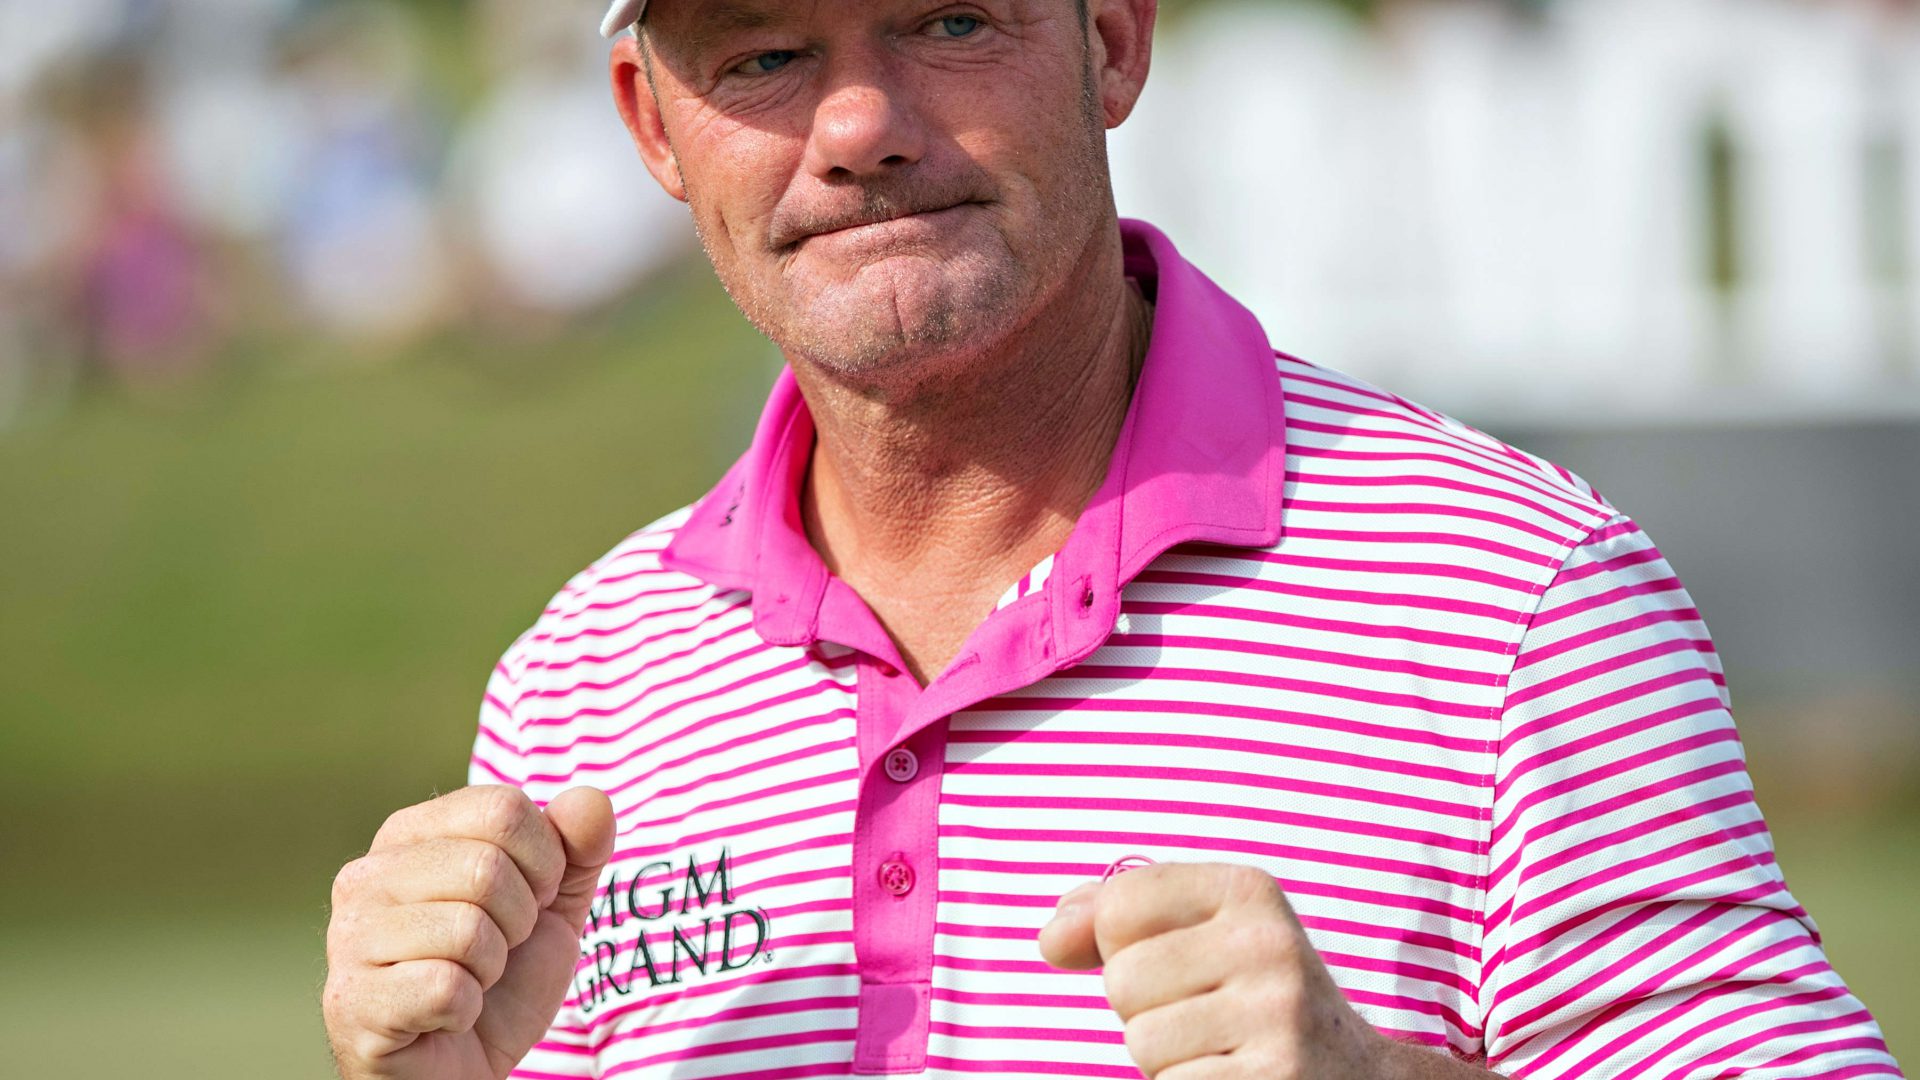 BIRMINGHAM, ALABAMA - MAY 09: Alex Cejka from Germany reacts after winning the Regions Tradition at Greystone Country Club on May 09, 2021 in Birmingham, Alabama. (Photo by Wesley Hitt/Getty Images)